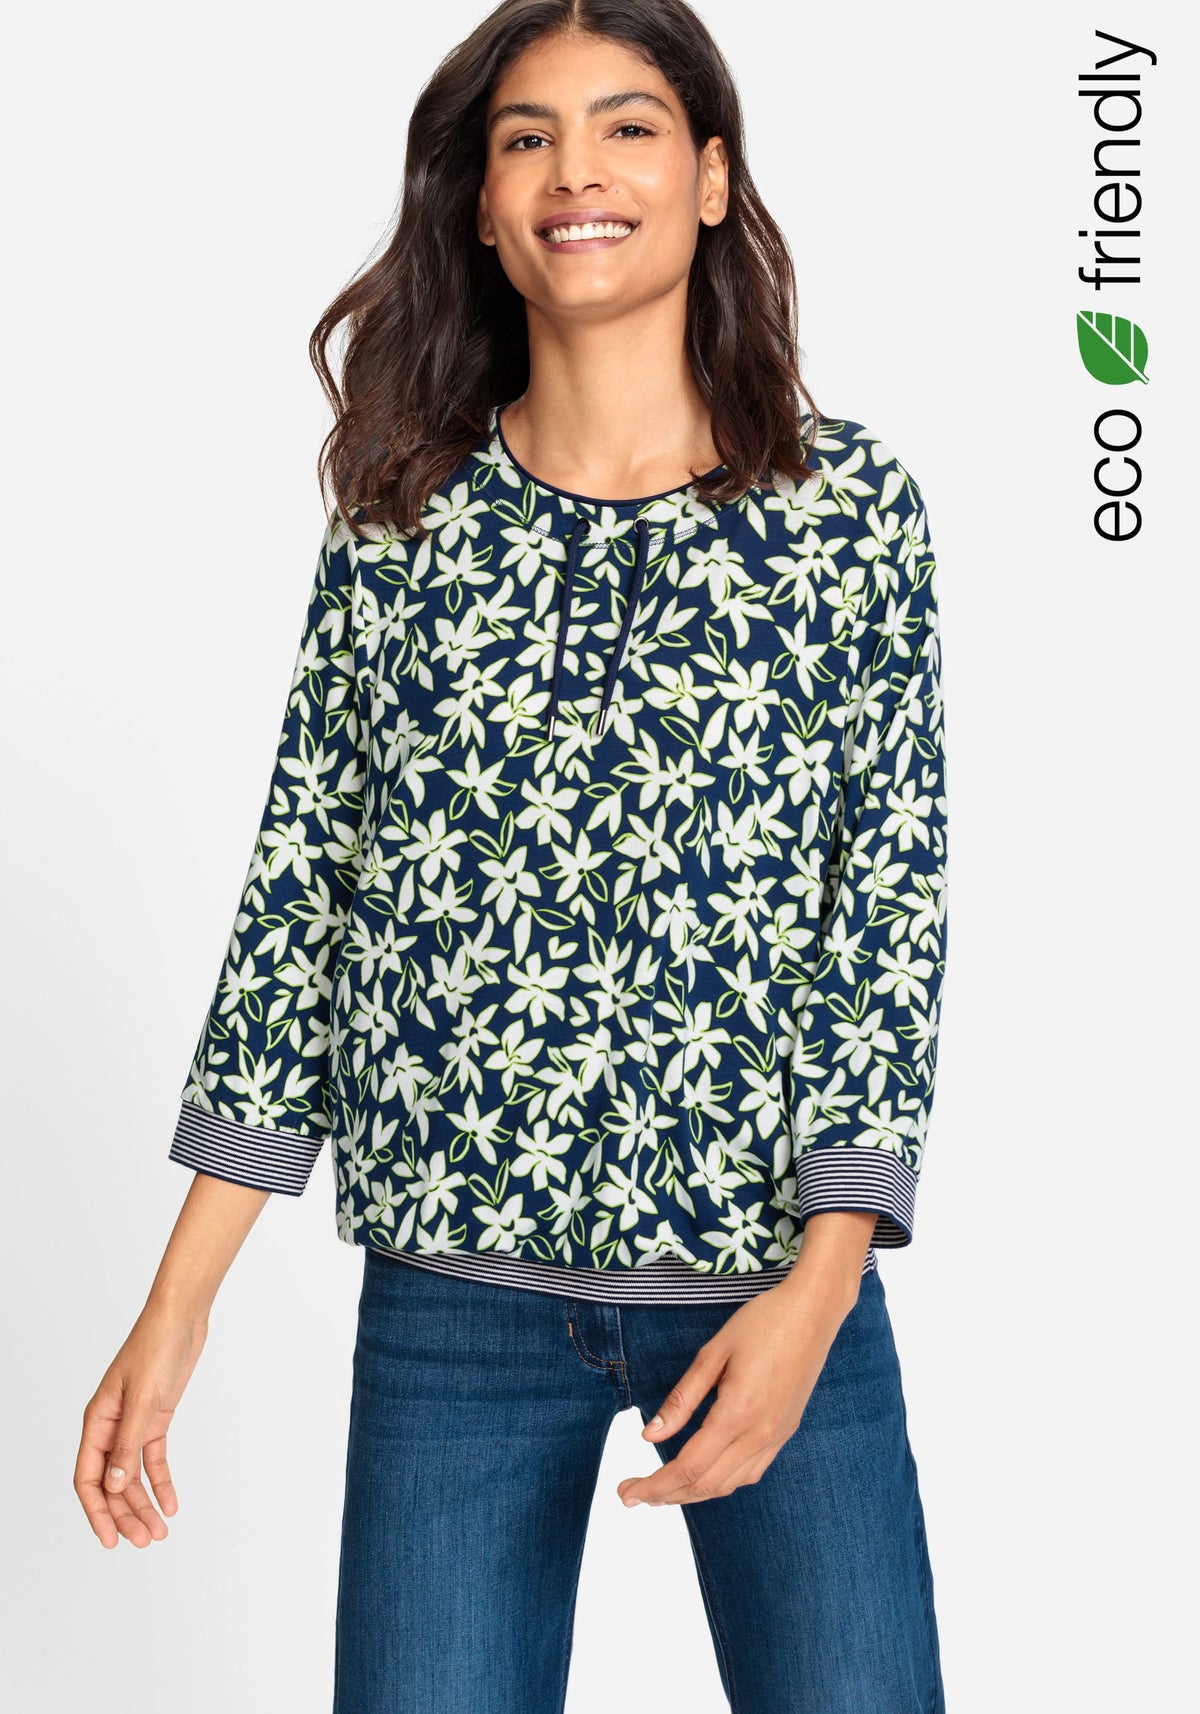 3/4 Sleeve Floral Print Tee containing LENZING™ ECOVERO™ Viscose